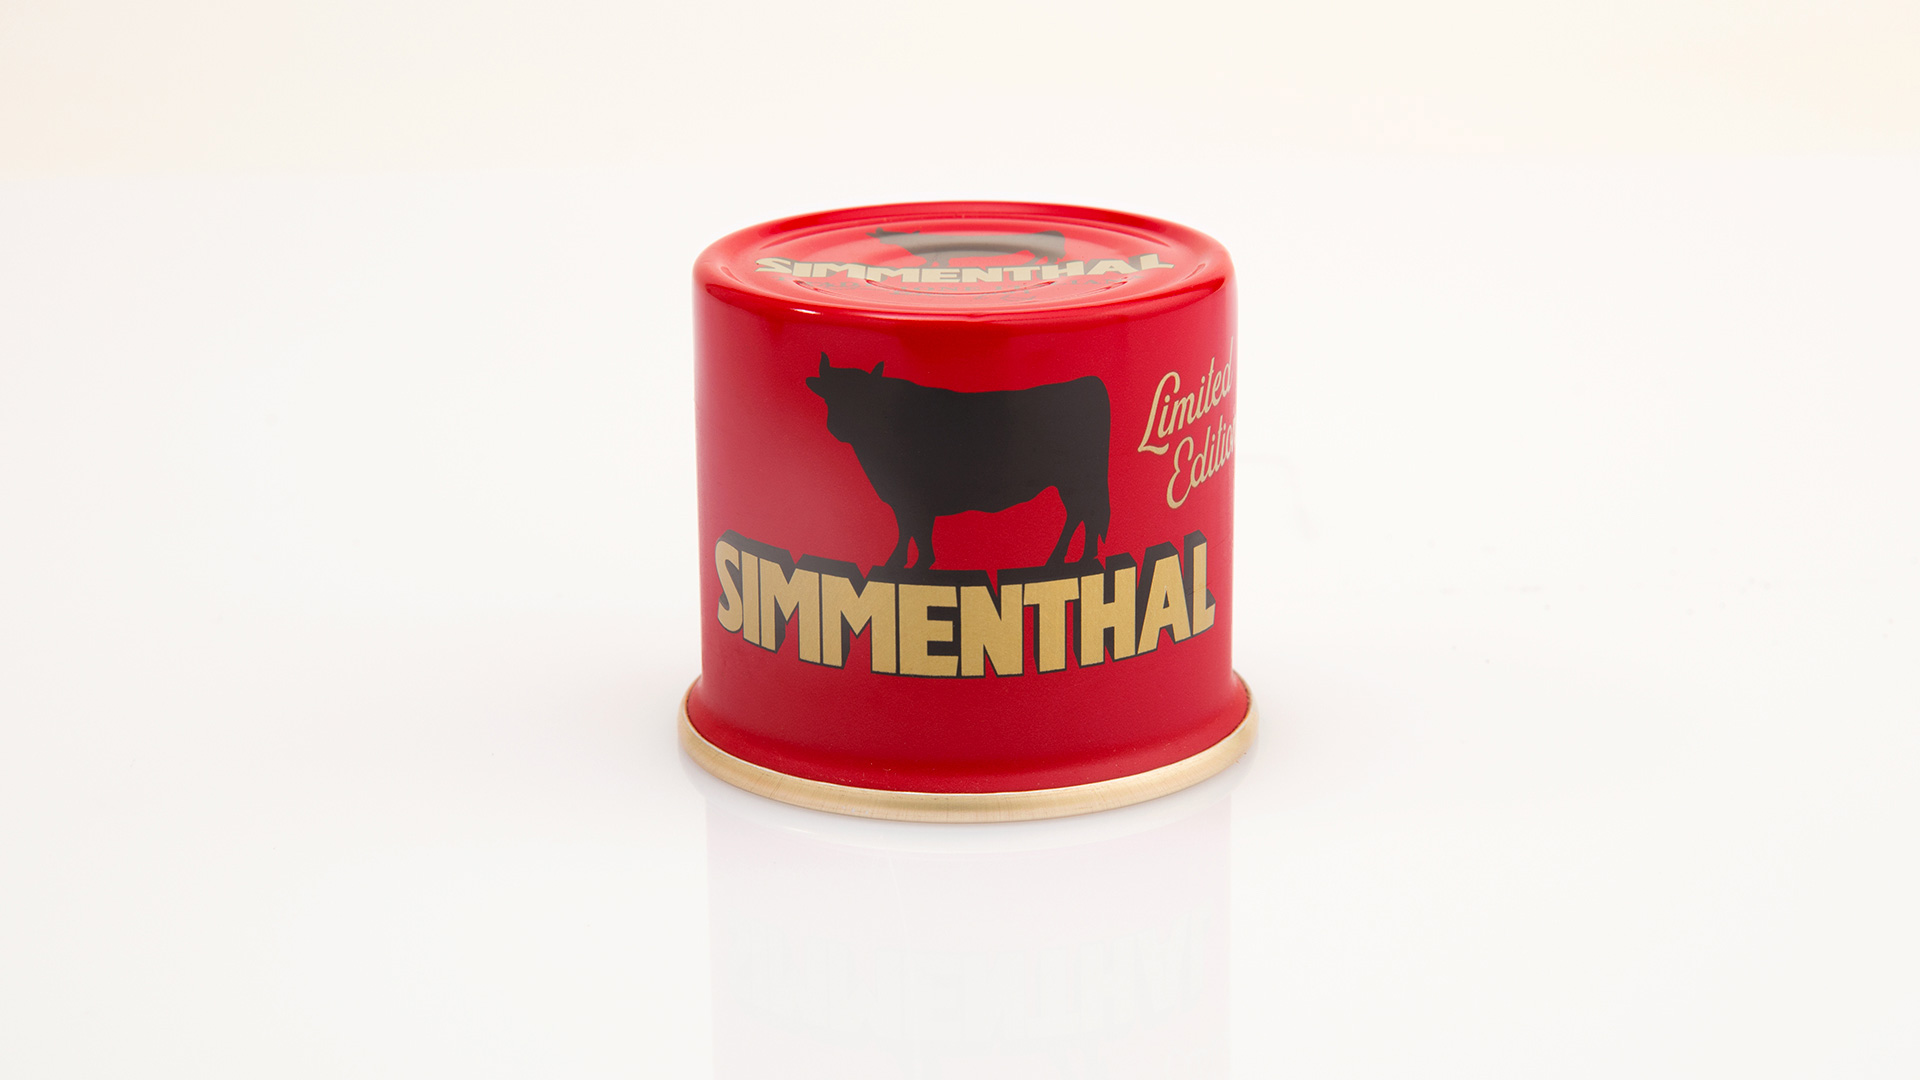 Simmenthal Limited Edition